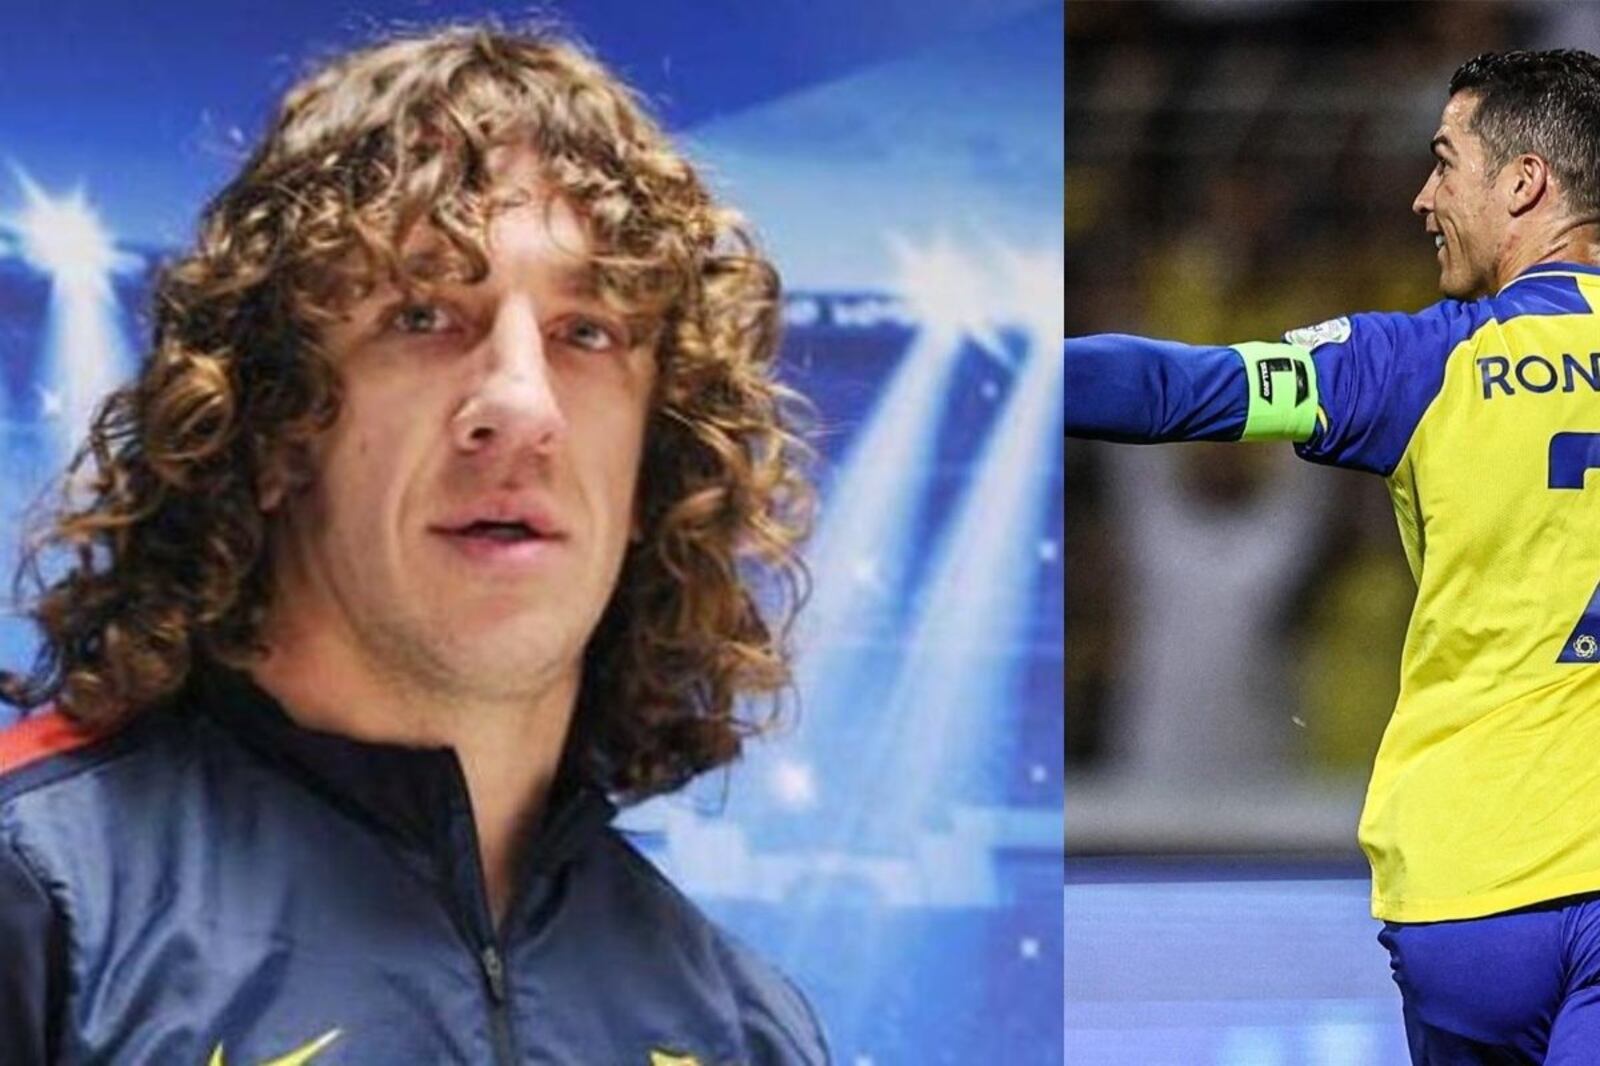 Carles Puyol names the toughest player he's ever faced and it's not Cristiano Ronaldo